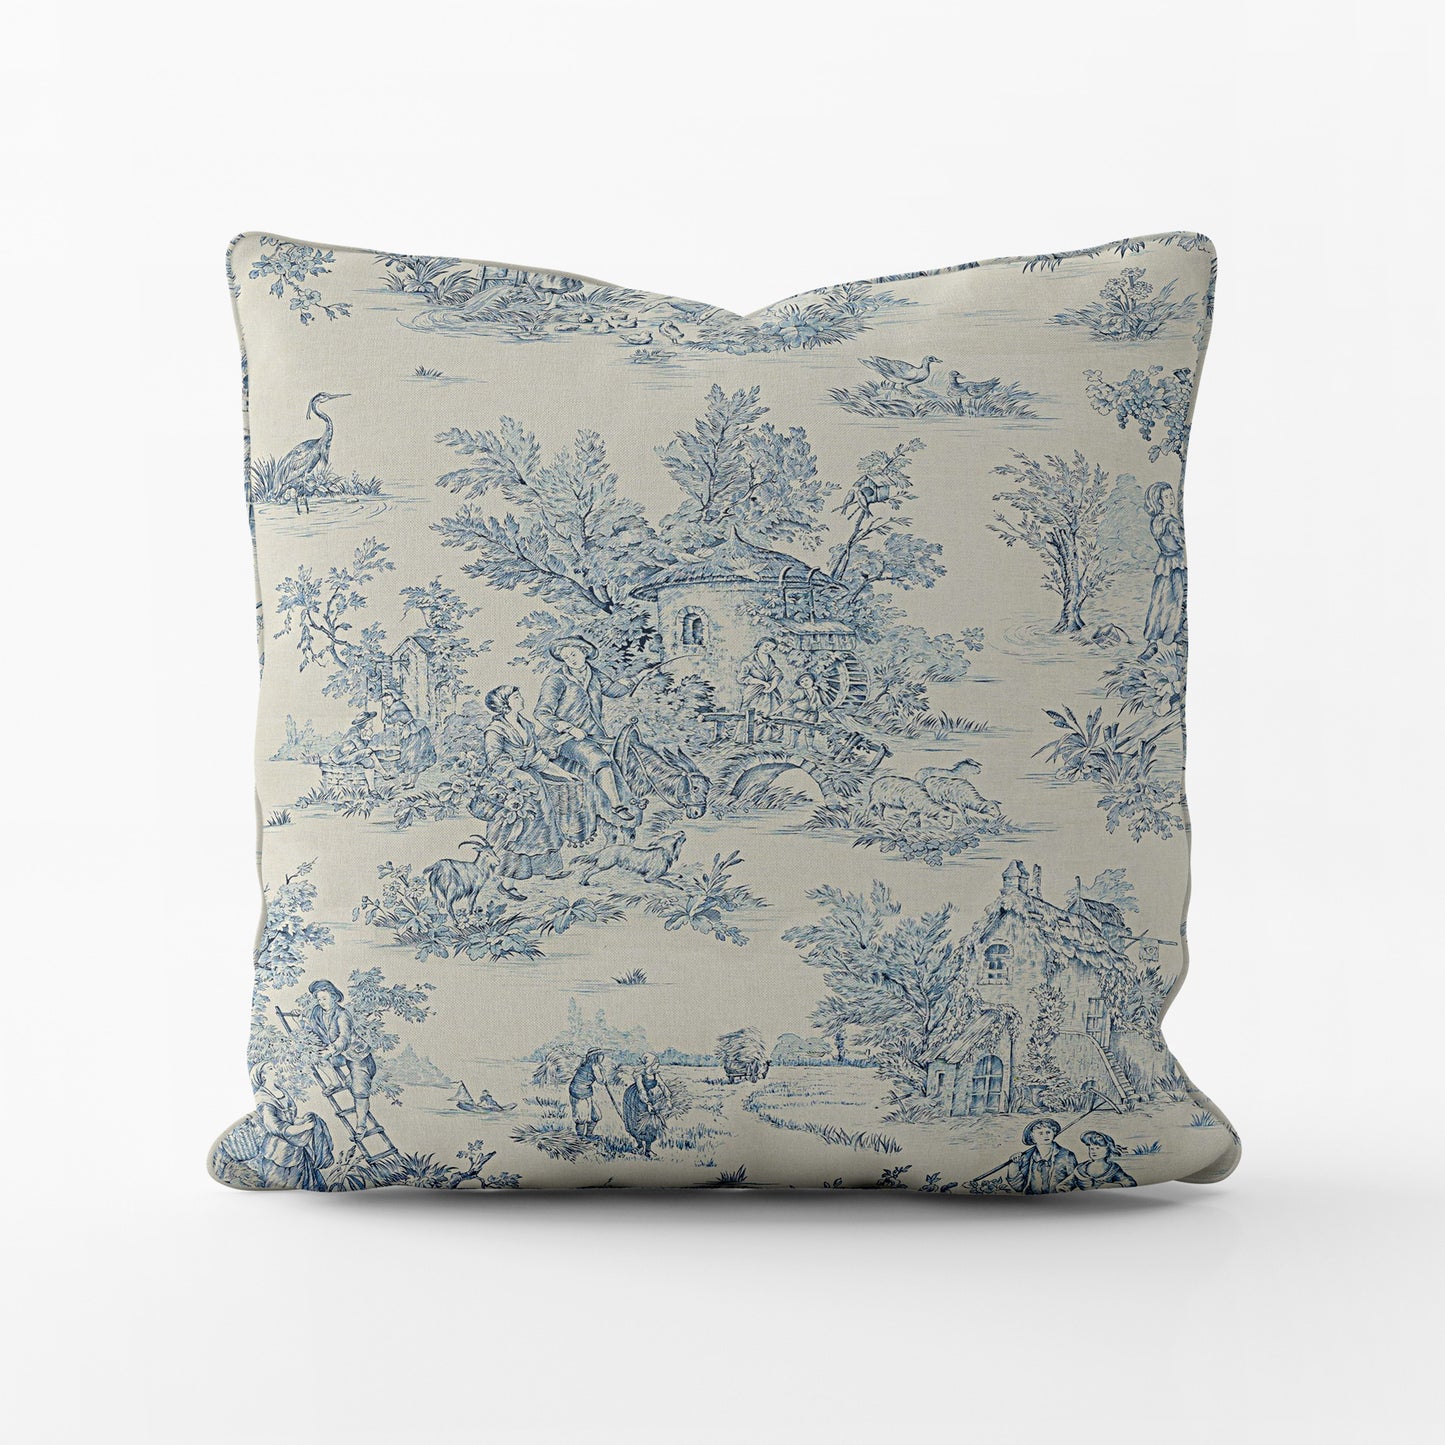 Decorative Pillows in Pastorale #2 Blue on Cream French Country Toile